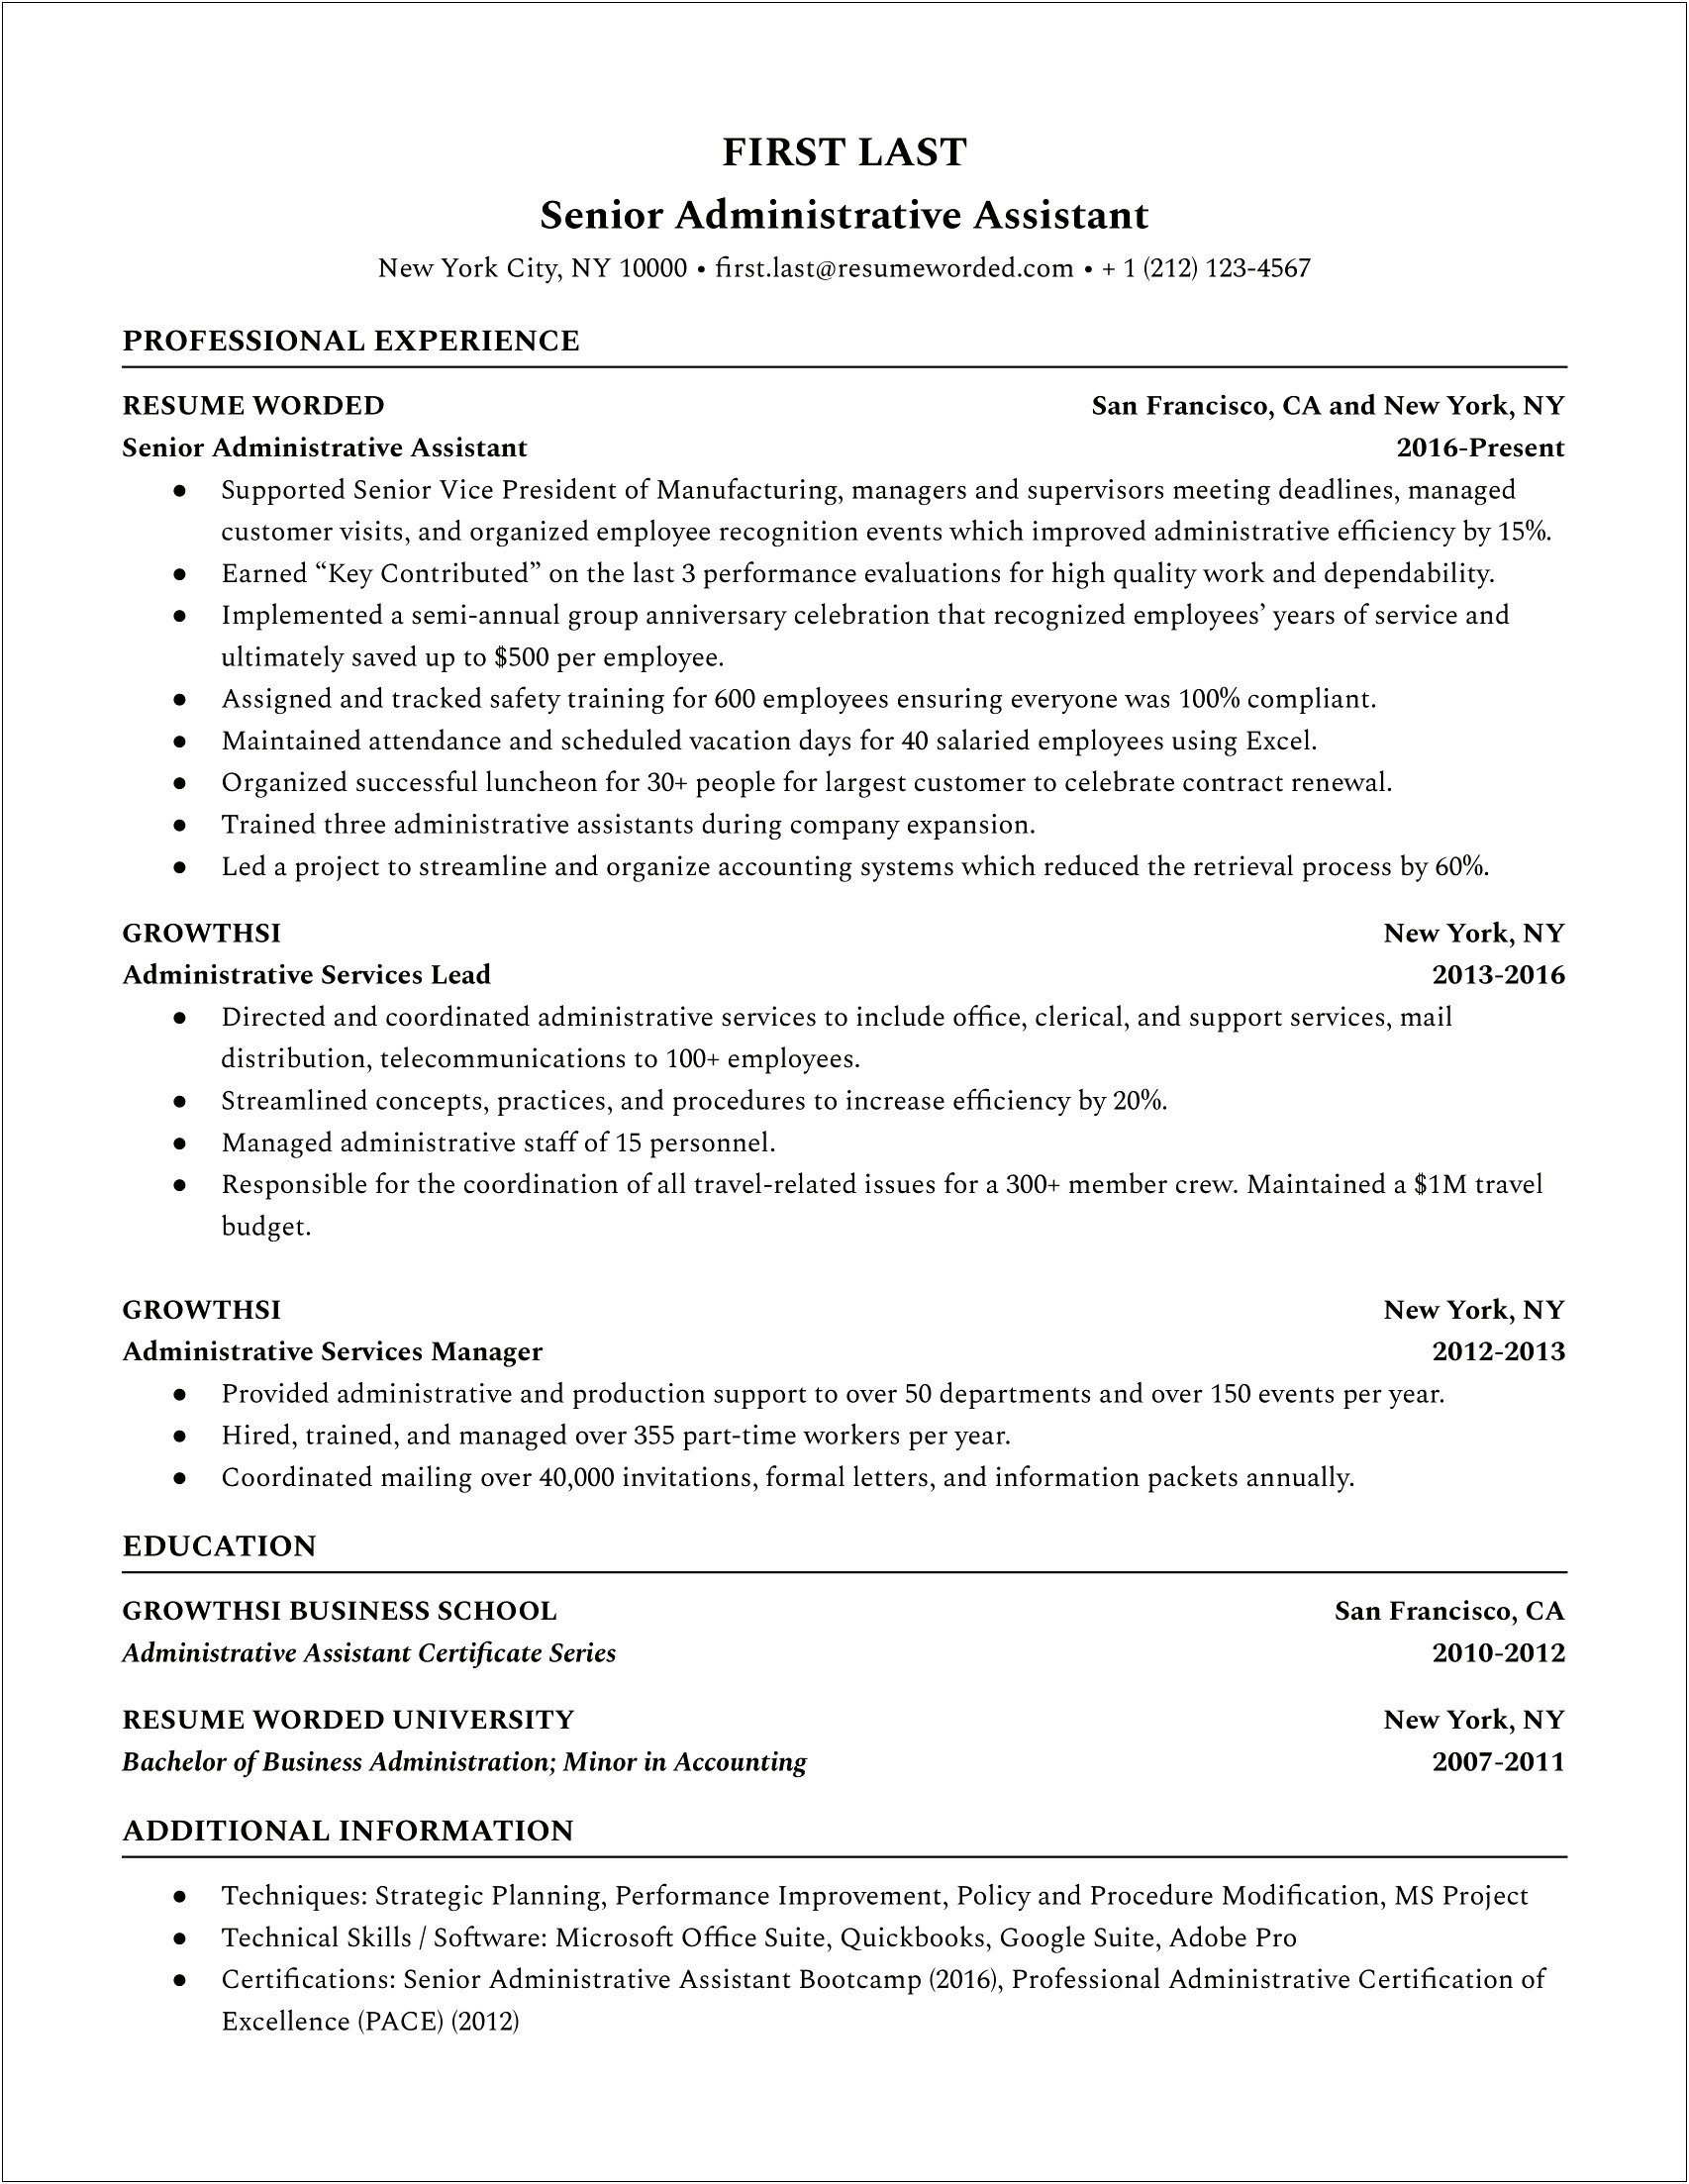 Resume Objective Sample For Administrative Assistant